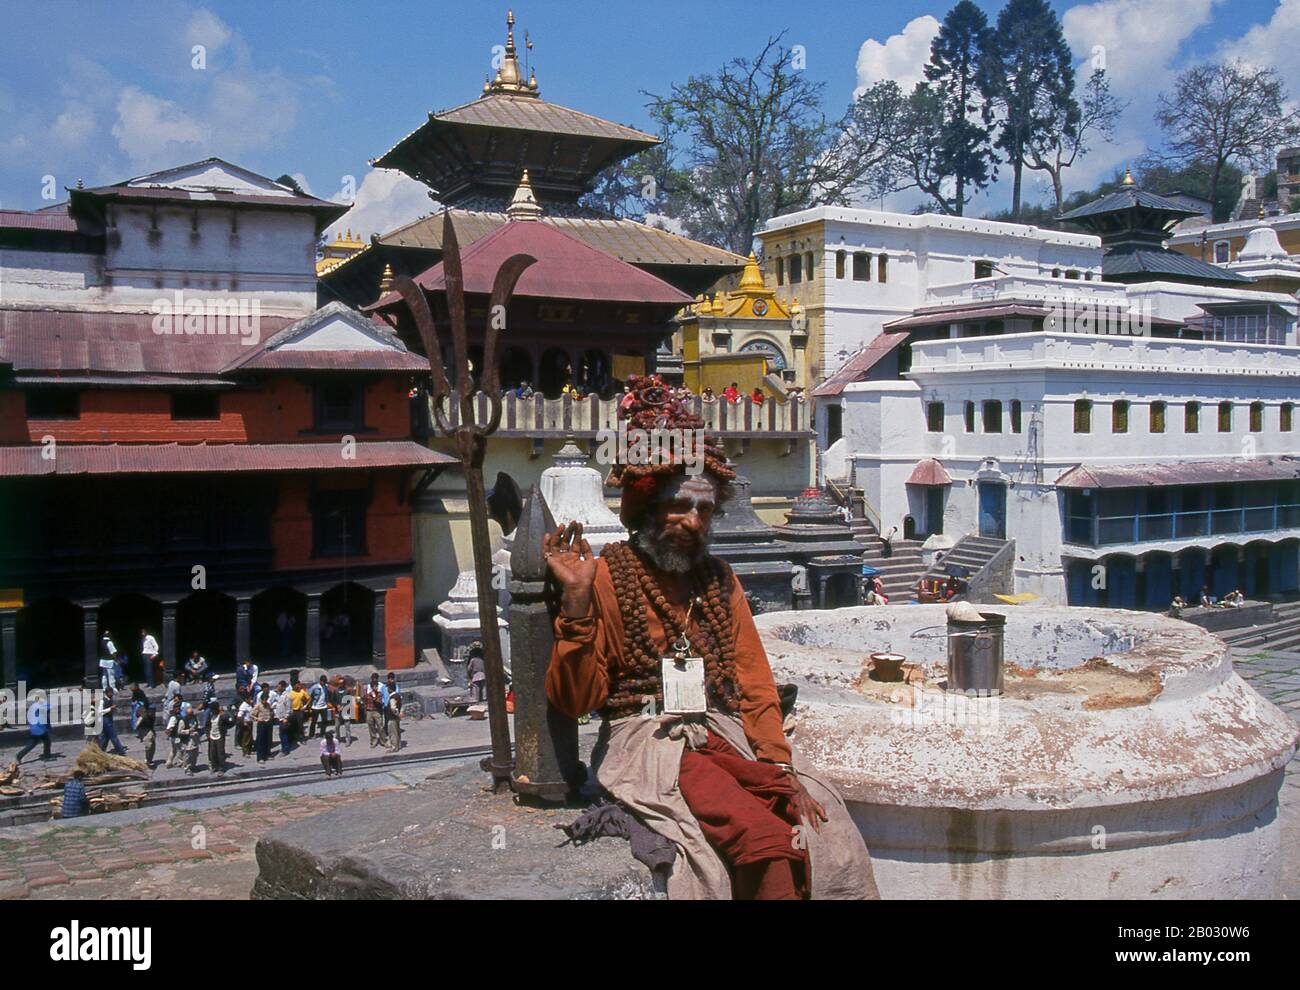 The most revered Hindu site in Nepal is the extensive Pashupatinath Temple complex, five kilometres east of central Kathmandu. The focus of devotion here is a large silver Shivalingam with four faces of Shiva carved on its sides, making it a 'Chaturmukhi-Linga', or four-faced Shivalingam. Pashupati is one of Shiva’s 1,008 names, his manifestation as 'Lord of all Beasts' (pashu means 'beasts', pati means 'lord'); he is considered the guardian deity of Nepal.   The main temple building around the Shivalingam was built under King Birpalendra Malla in 1696, however the temple is said to have alrea Stock Photo